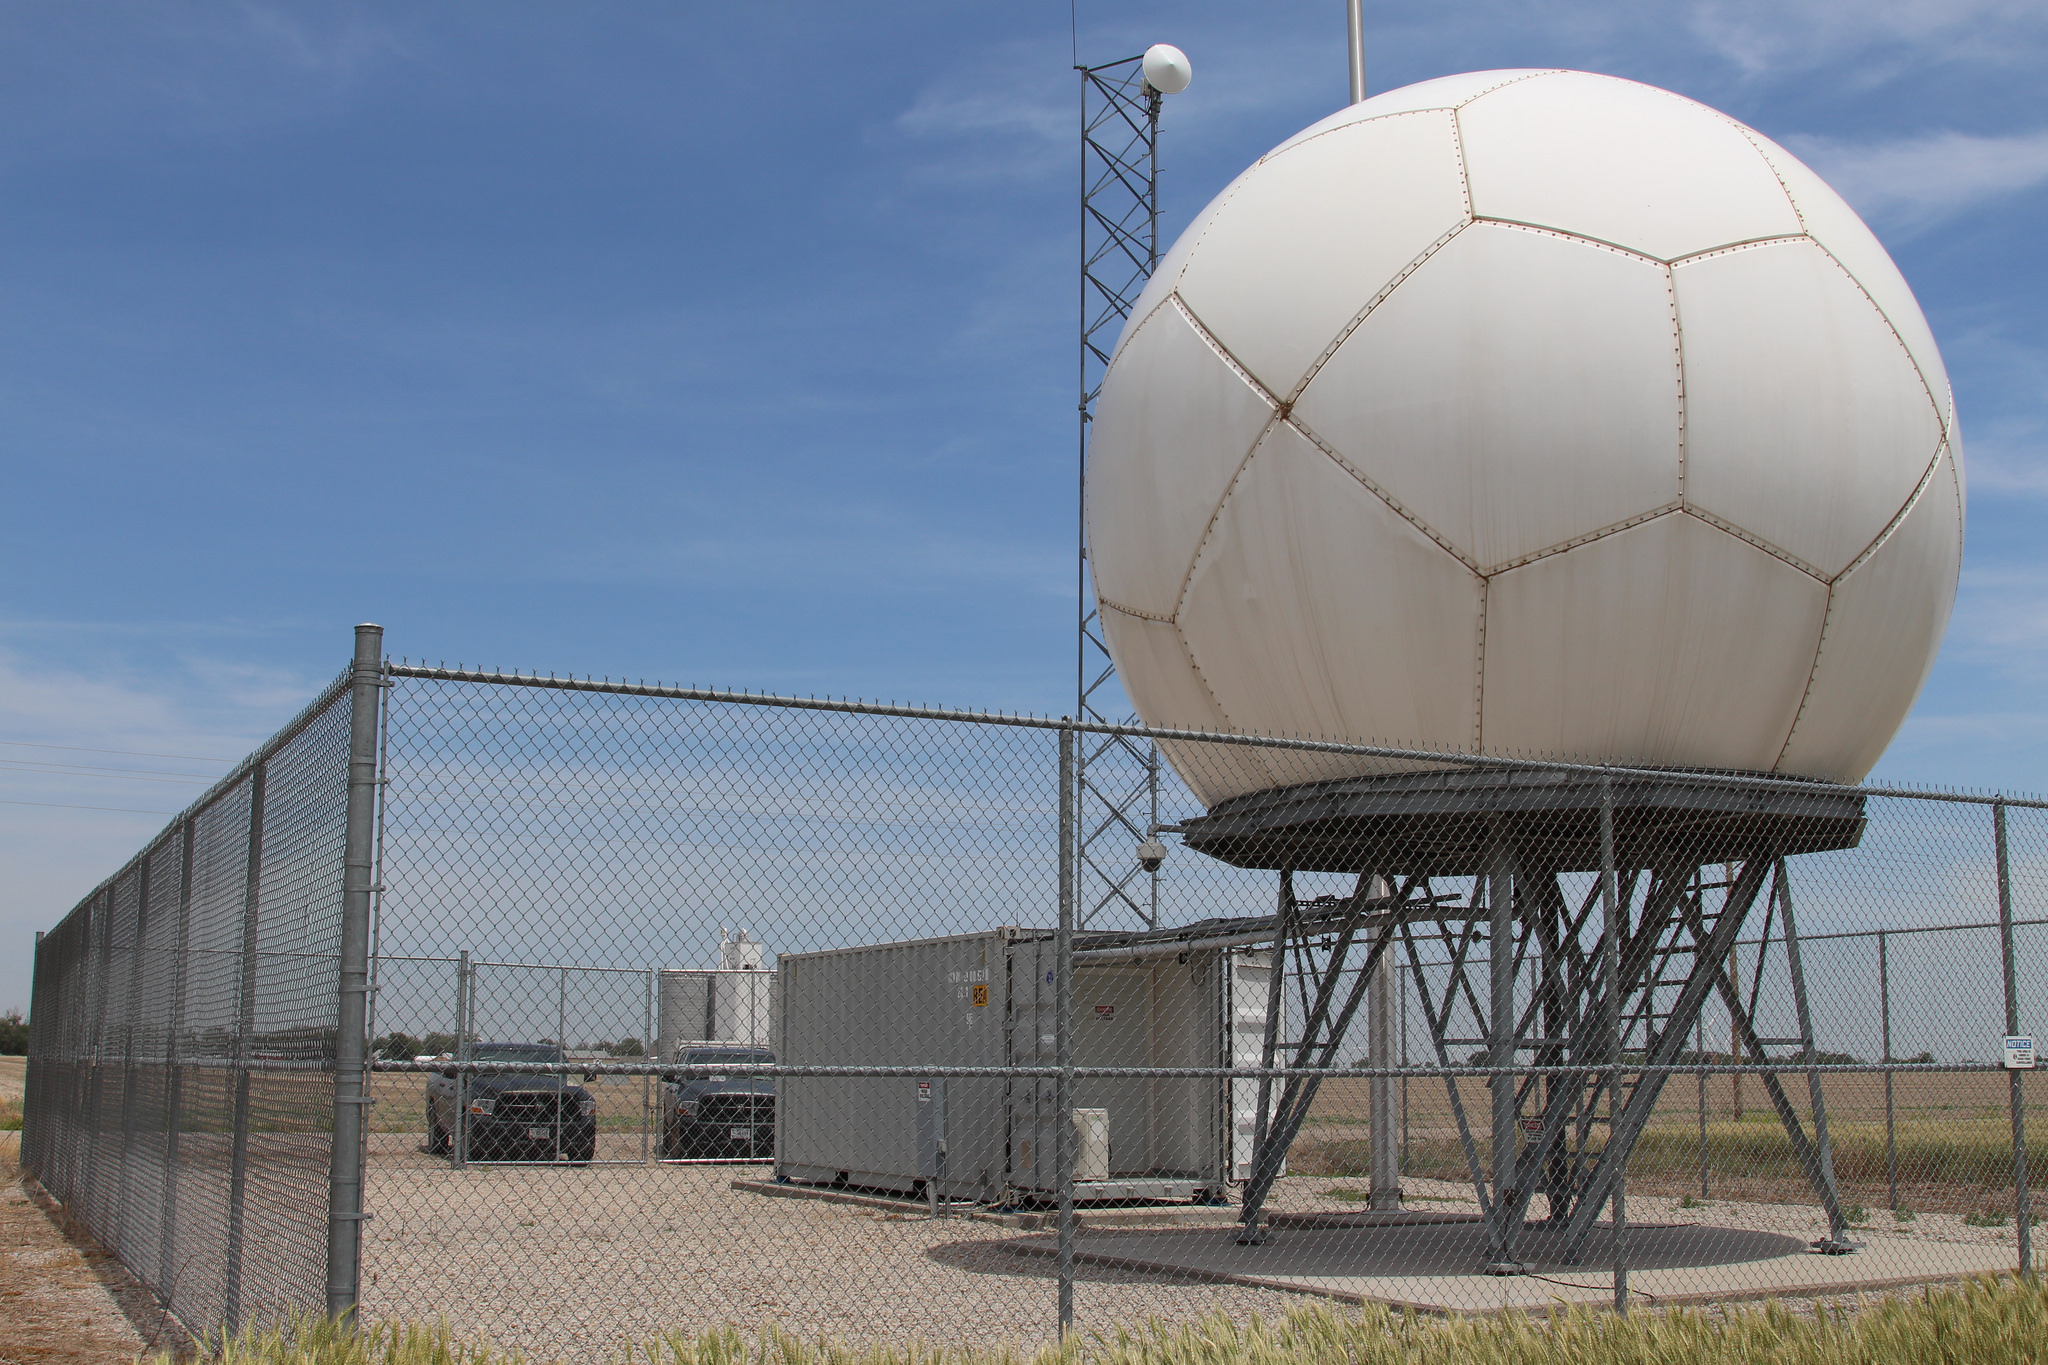 One of three X-band scanning precipitation radars at ARM’s Southern Great plains site. They provide measurements that identify precipitation type, estimate rainfall rates, and estimate the velocity of wind fields.